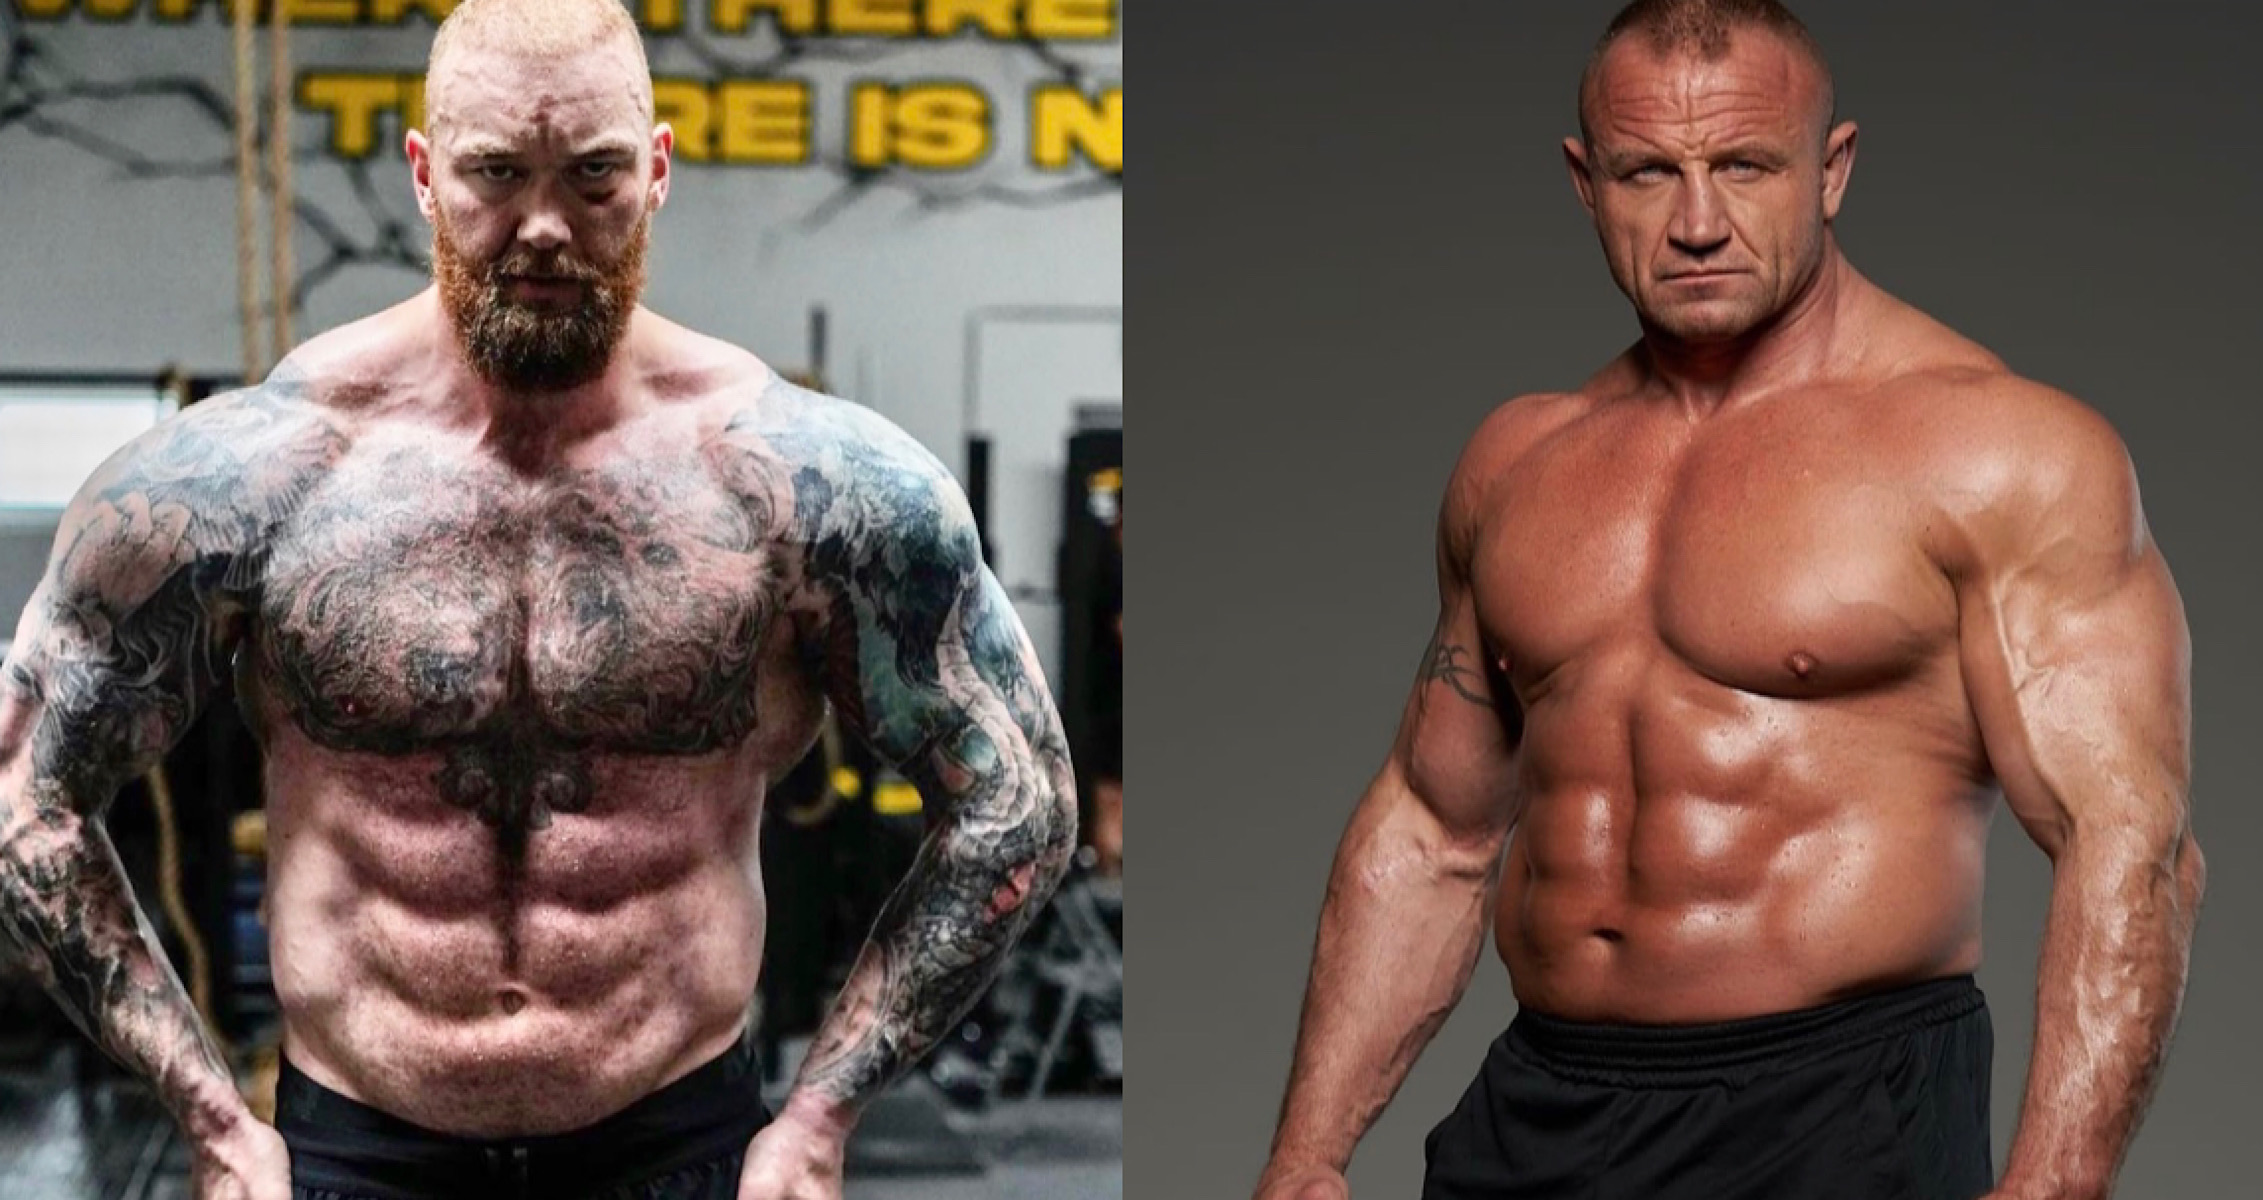 Could We See Mariusz Pudzianowski vs Hafthor Bjornsson in September?